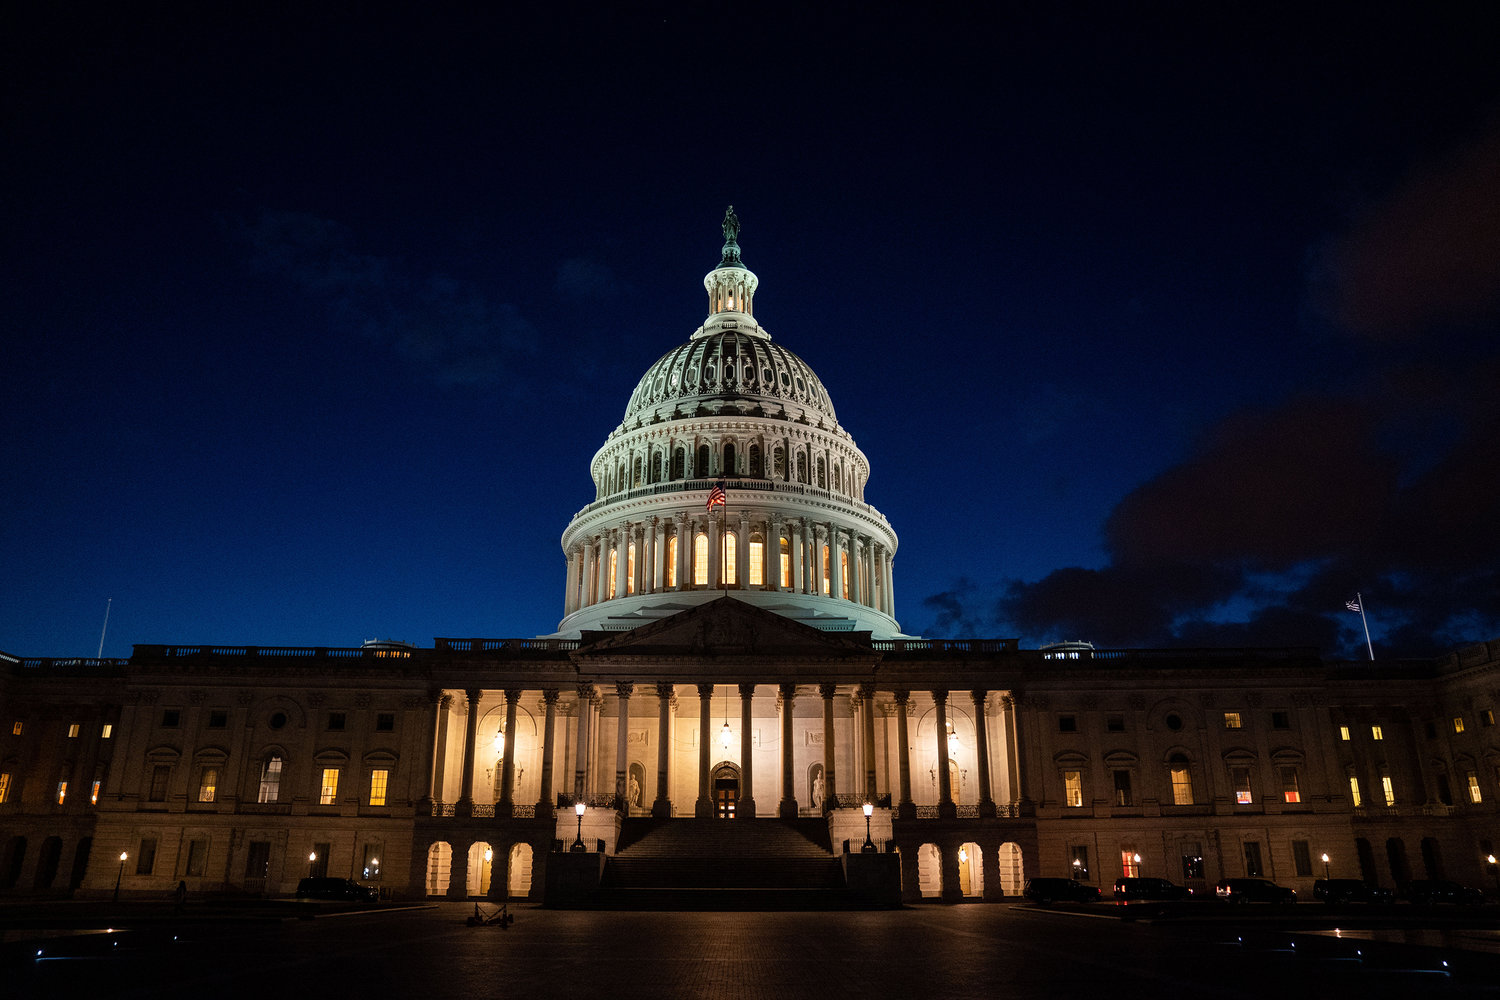 The U.S. Capitol Building on March 4, 2021, amid boosted security after officials warned of an attack plot by extremists, in Washington, D.C. (Kent Nishimura/Los Angeles Times/TNS)